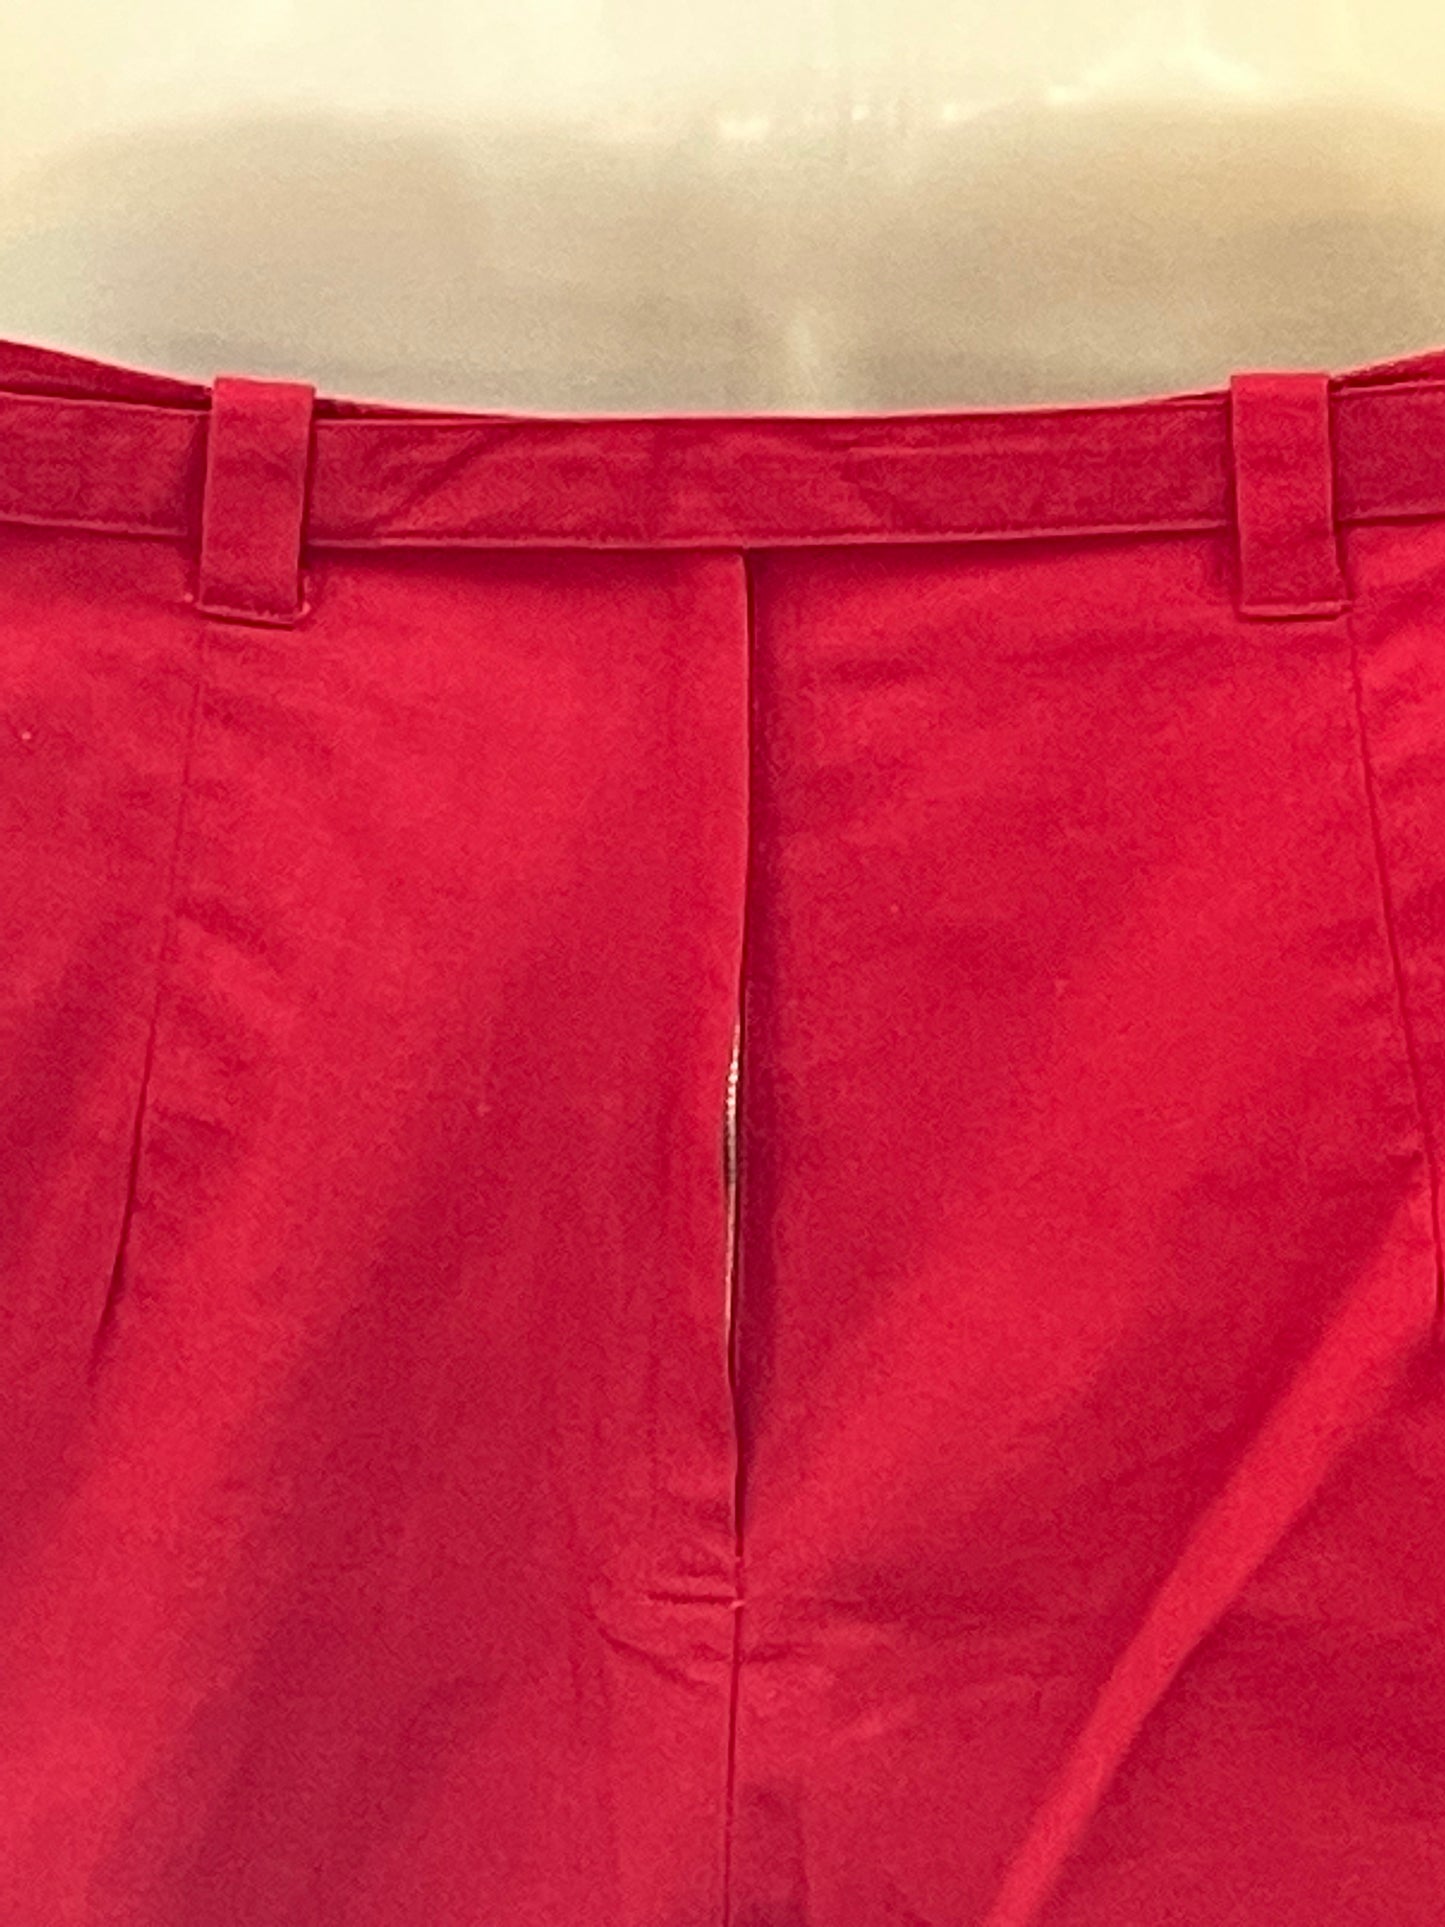 Red Women’s Shorts